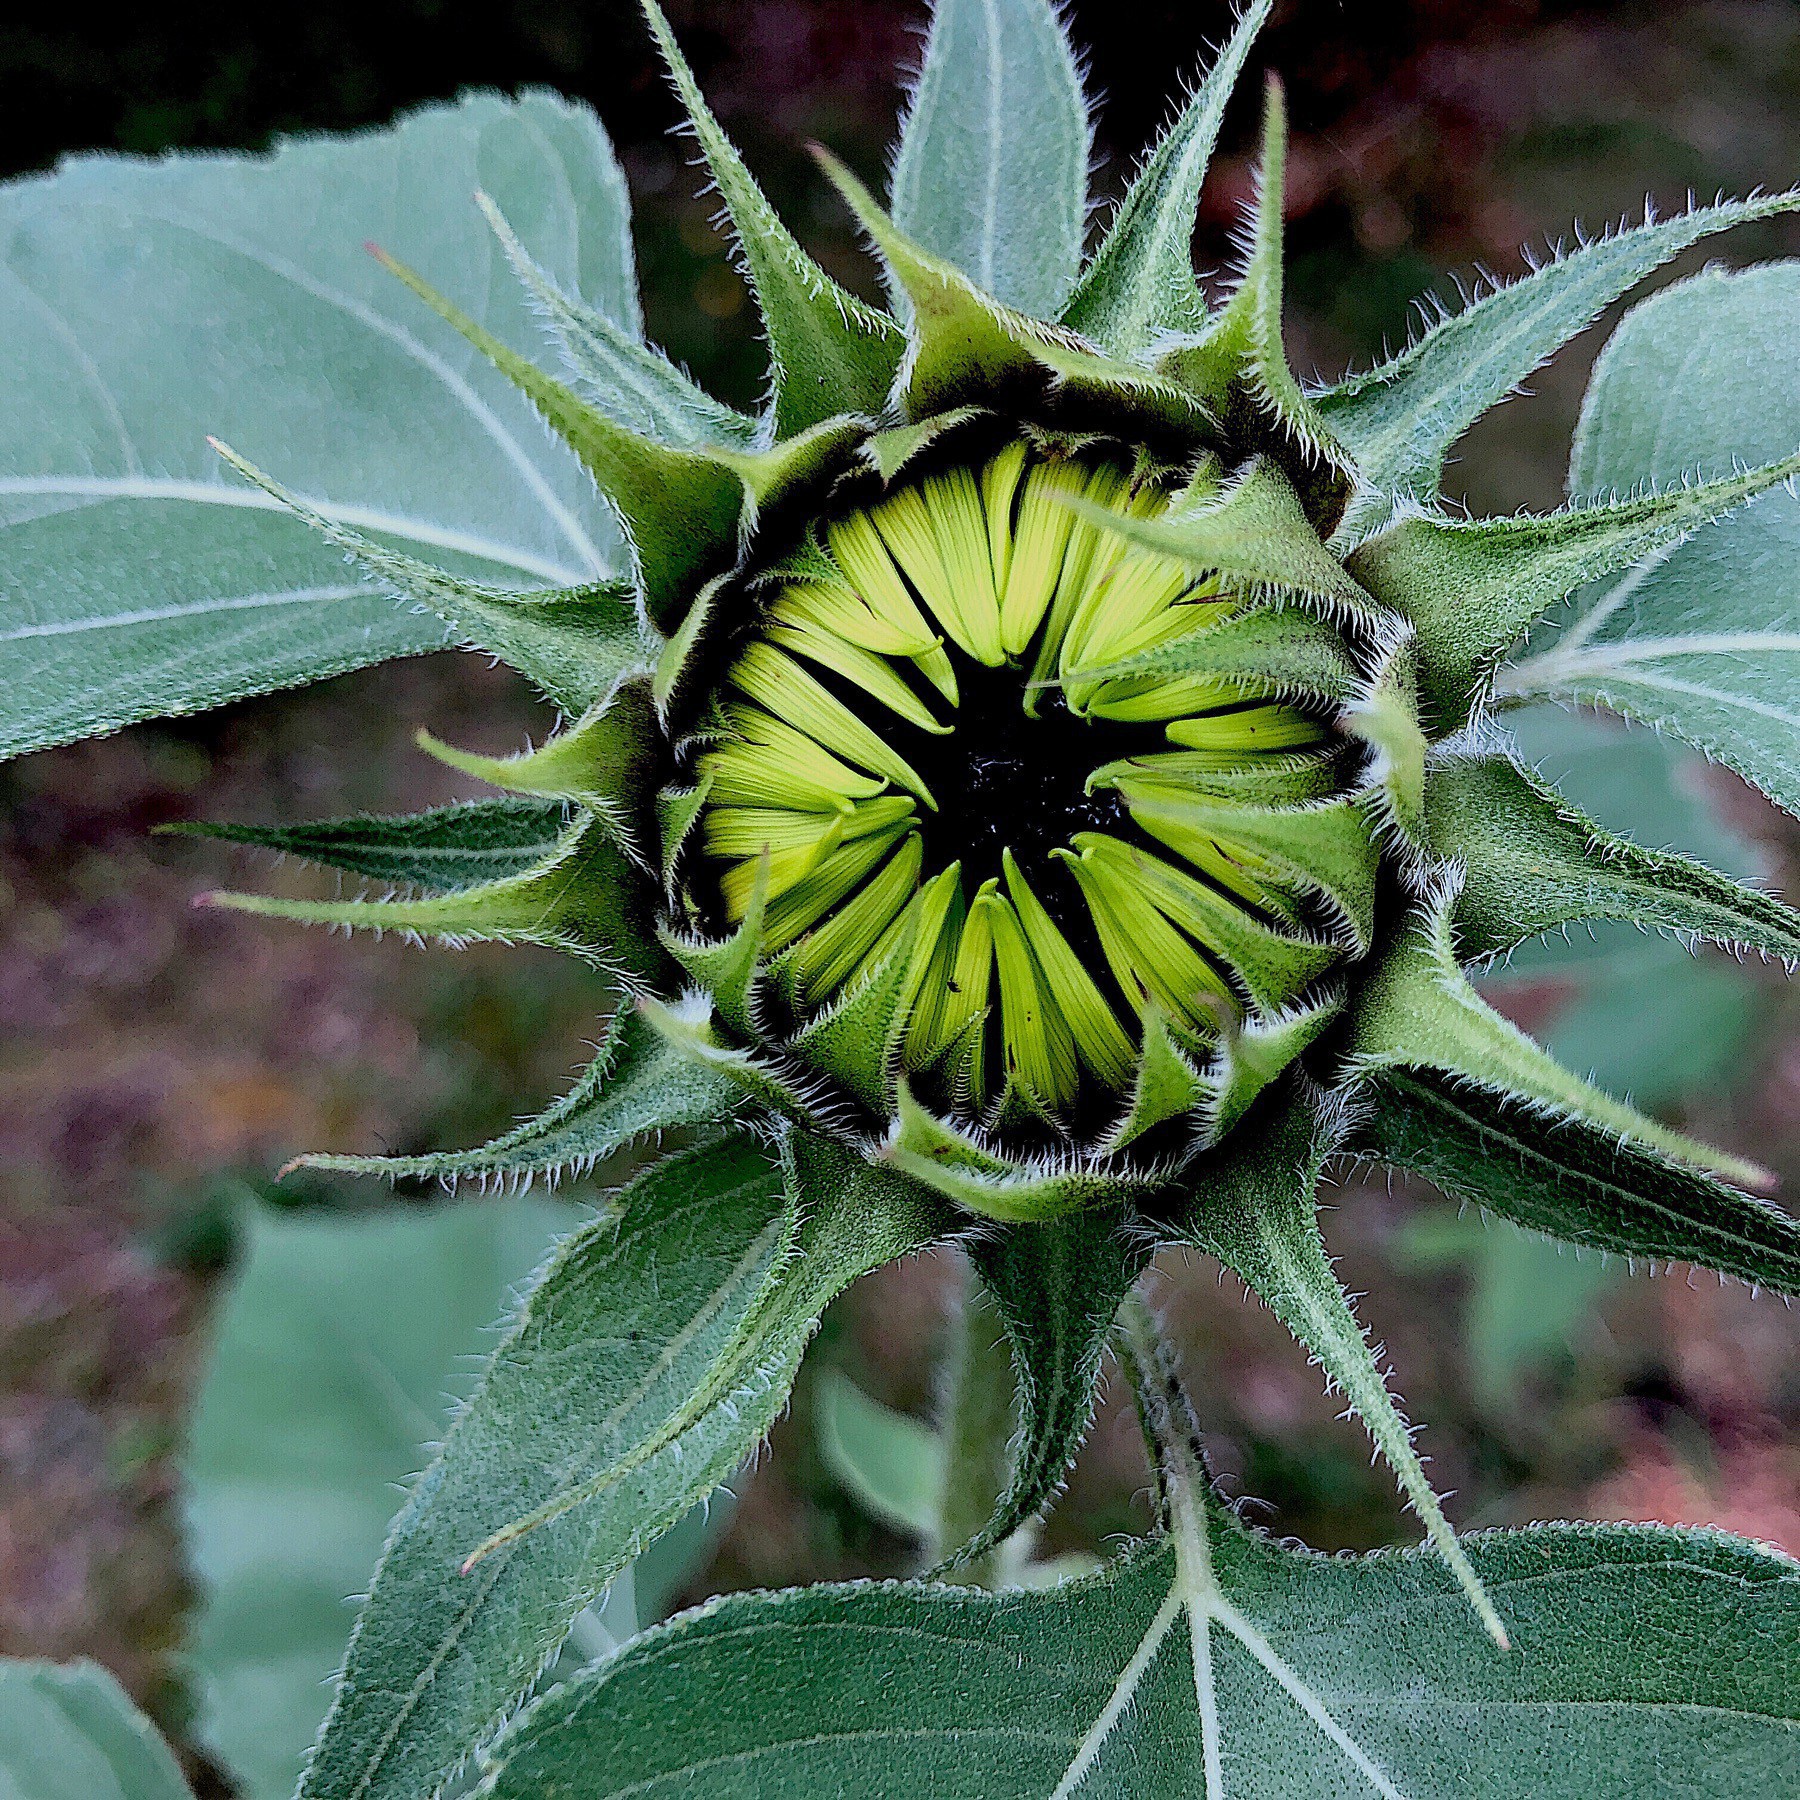 Sunflower before blooming.